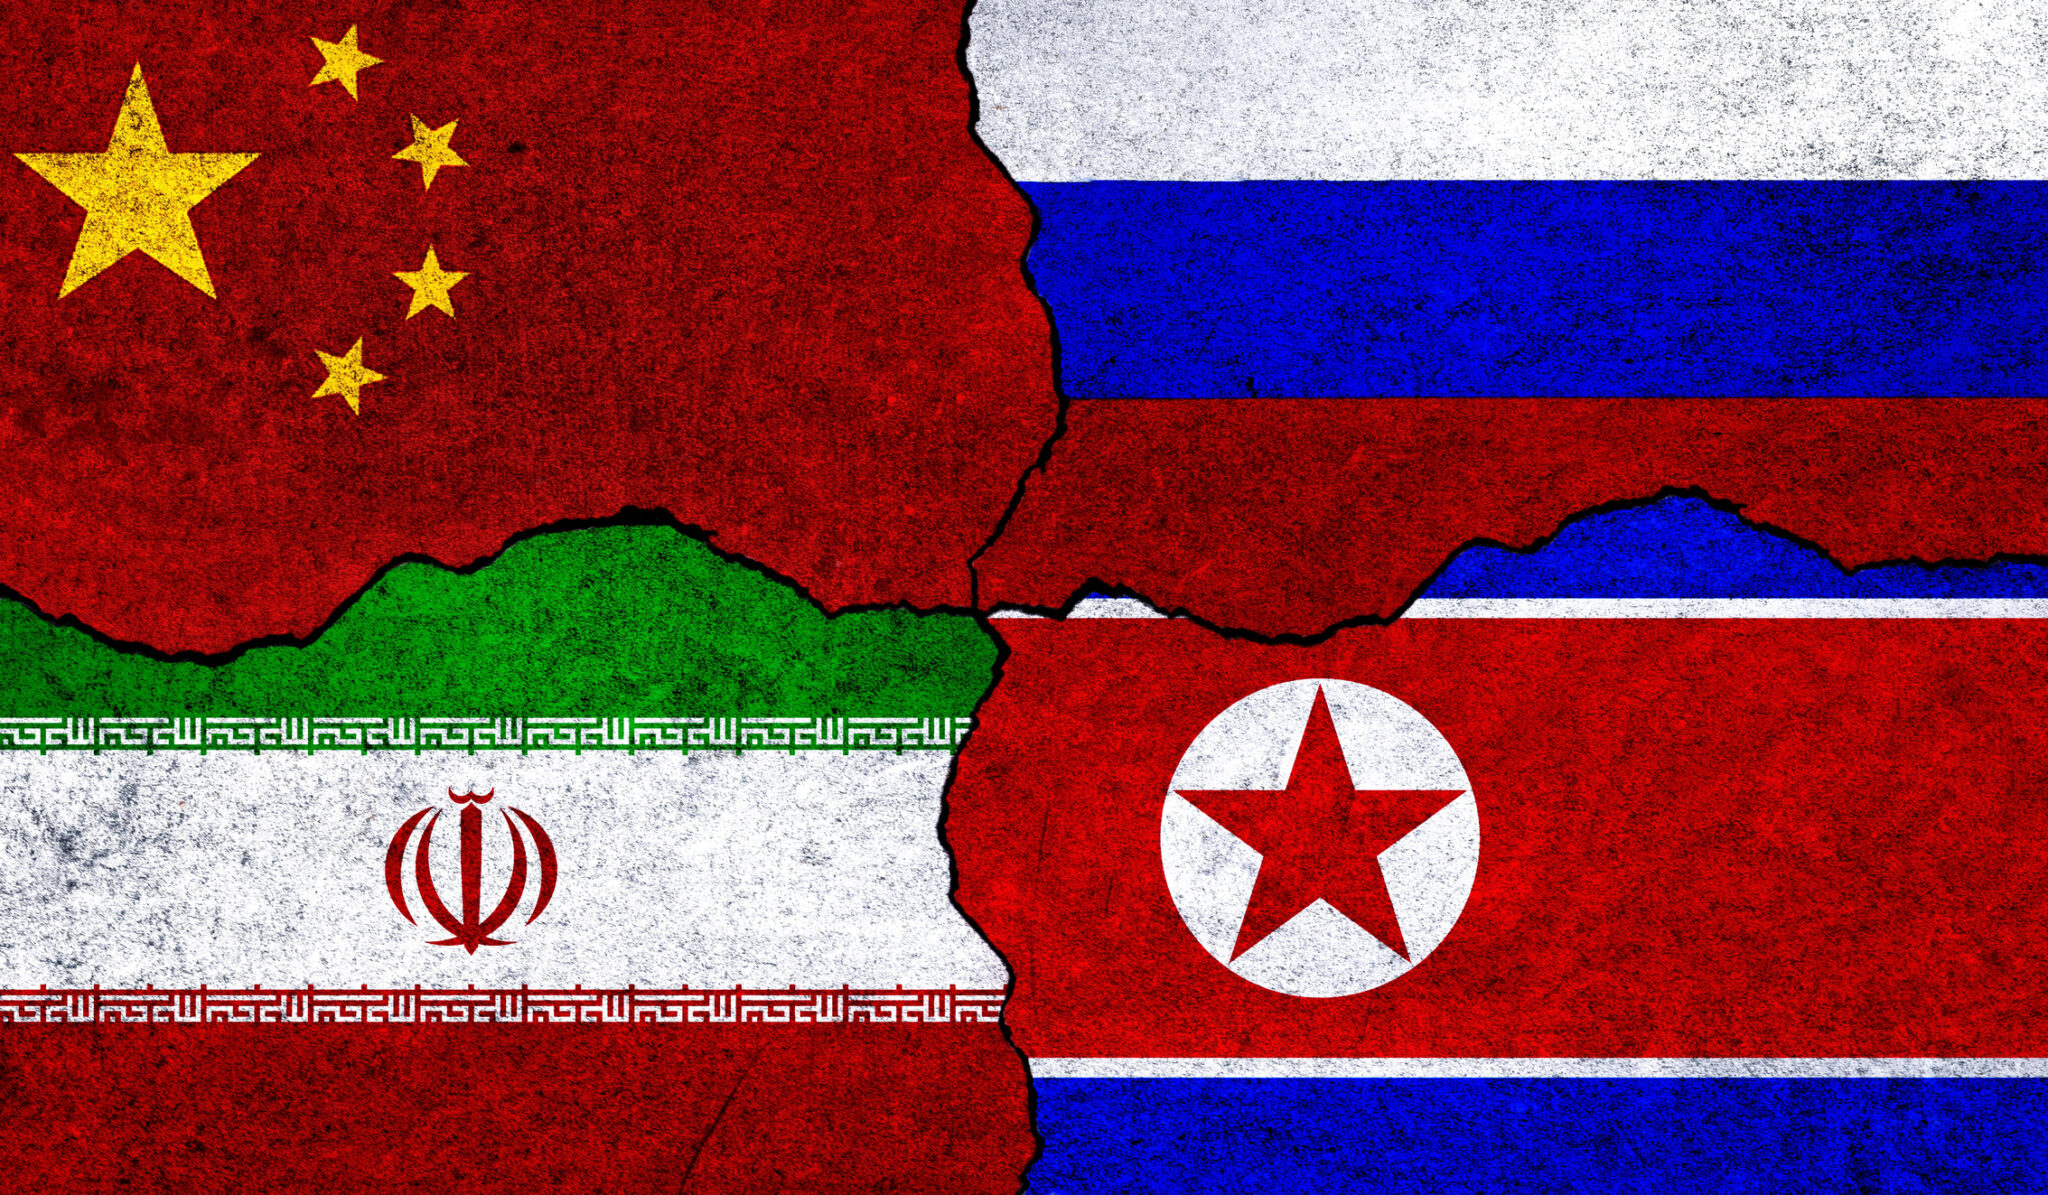 What are the Implications of the Growing Alliance Between Russia, China, Iran, and North Korea?